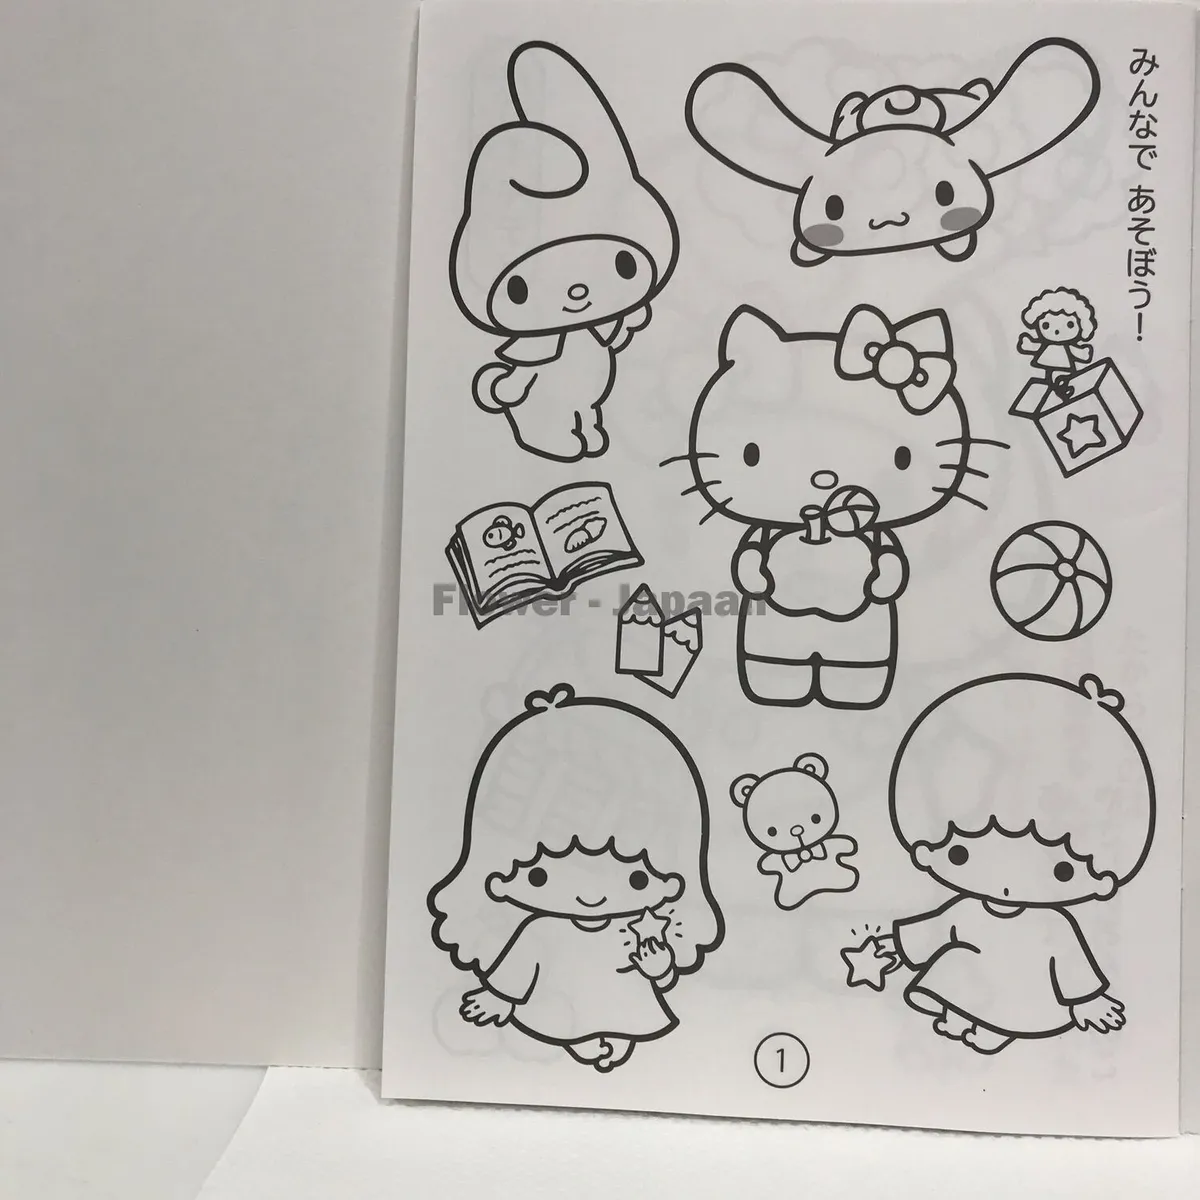 Sanrio characters hello kitty my melody pochaco coloring book